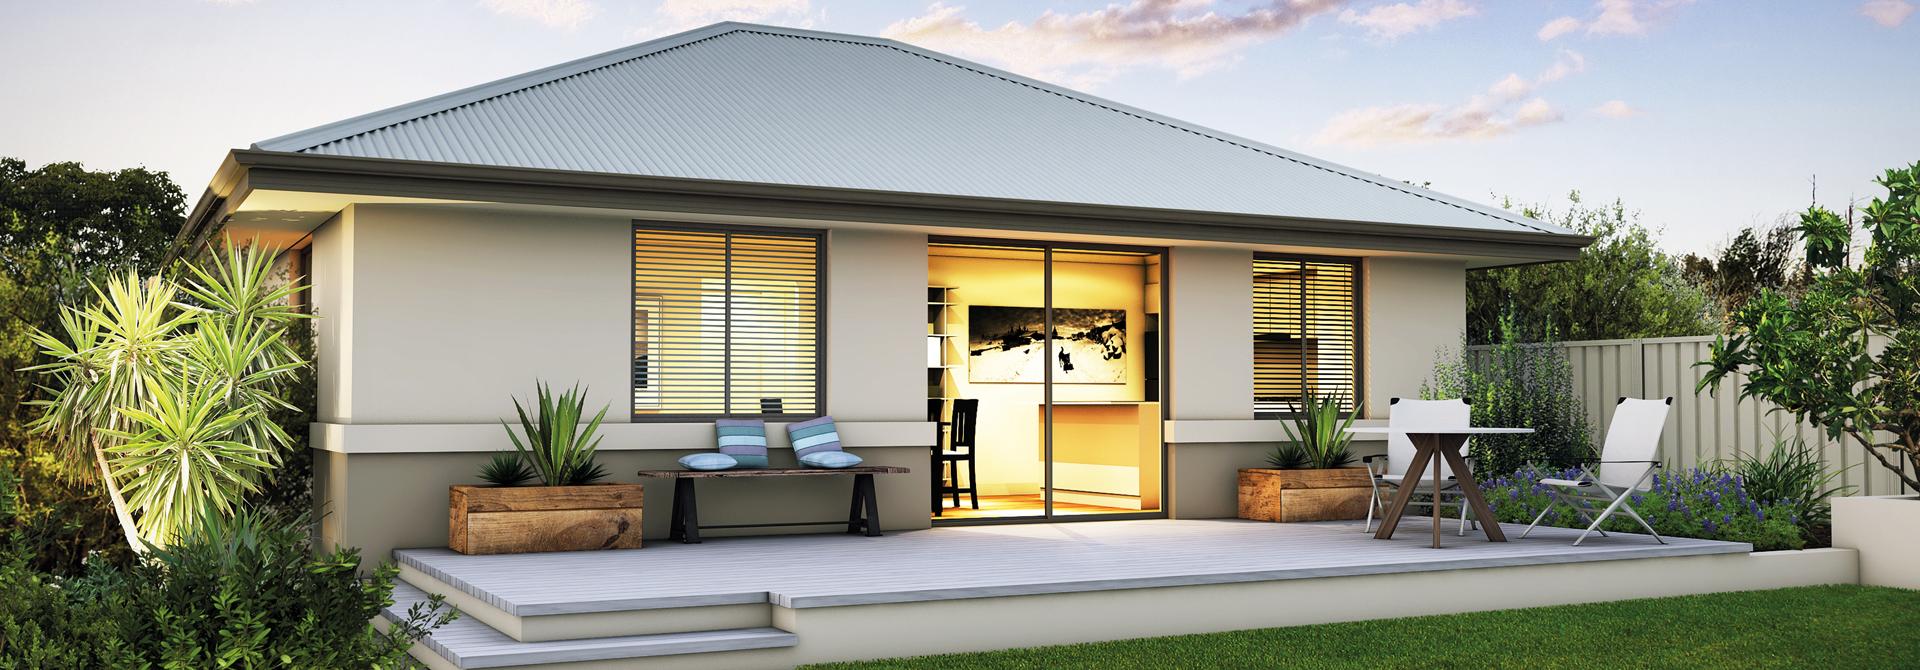 Why You Should Hire Renovate Plans for your Granny Flat Designs